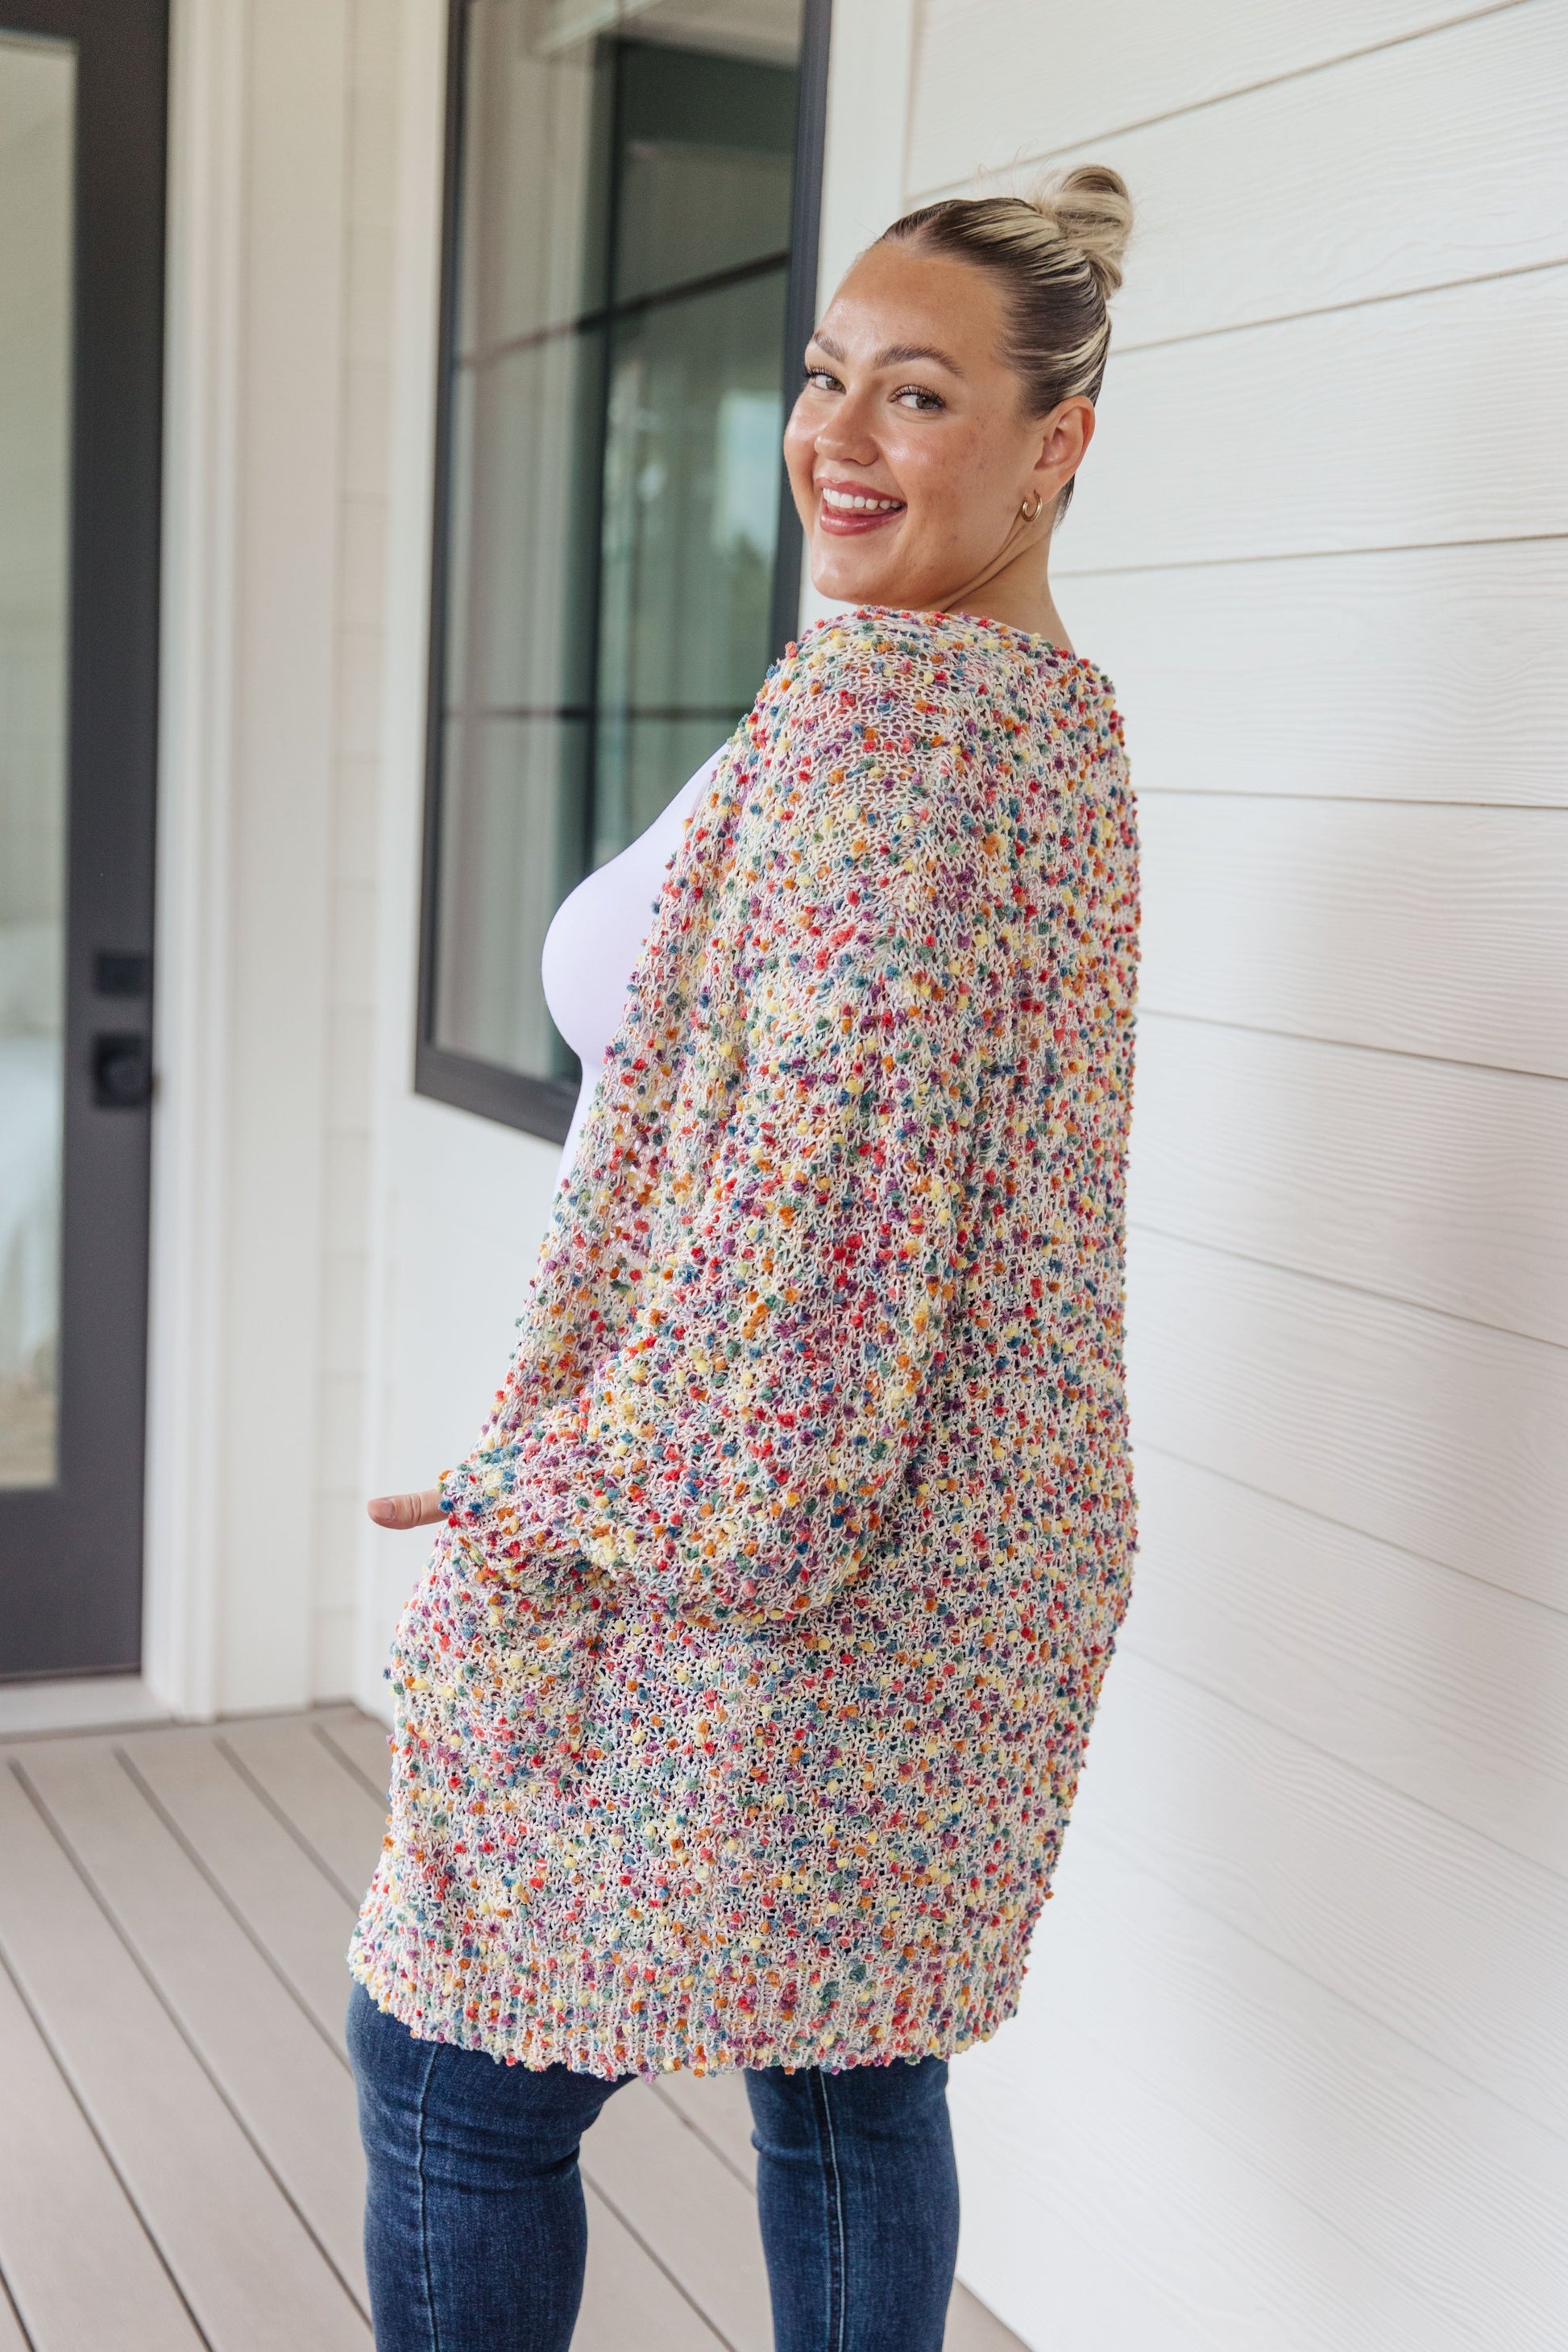 No Time Like The Present Confetti Cardigan in Ivory - Southern Divas Boutique